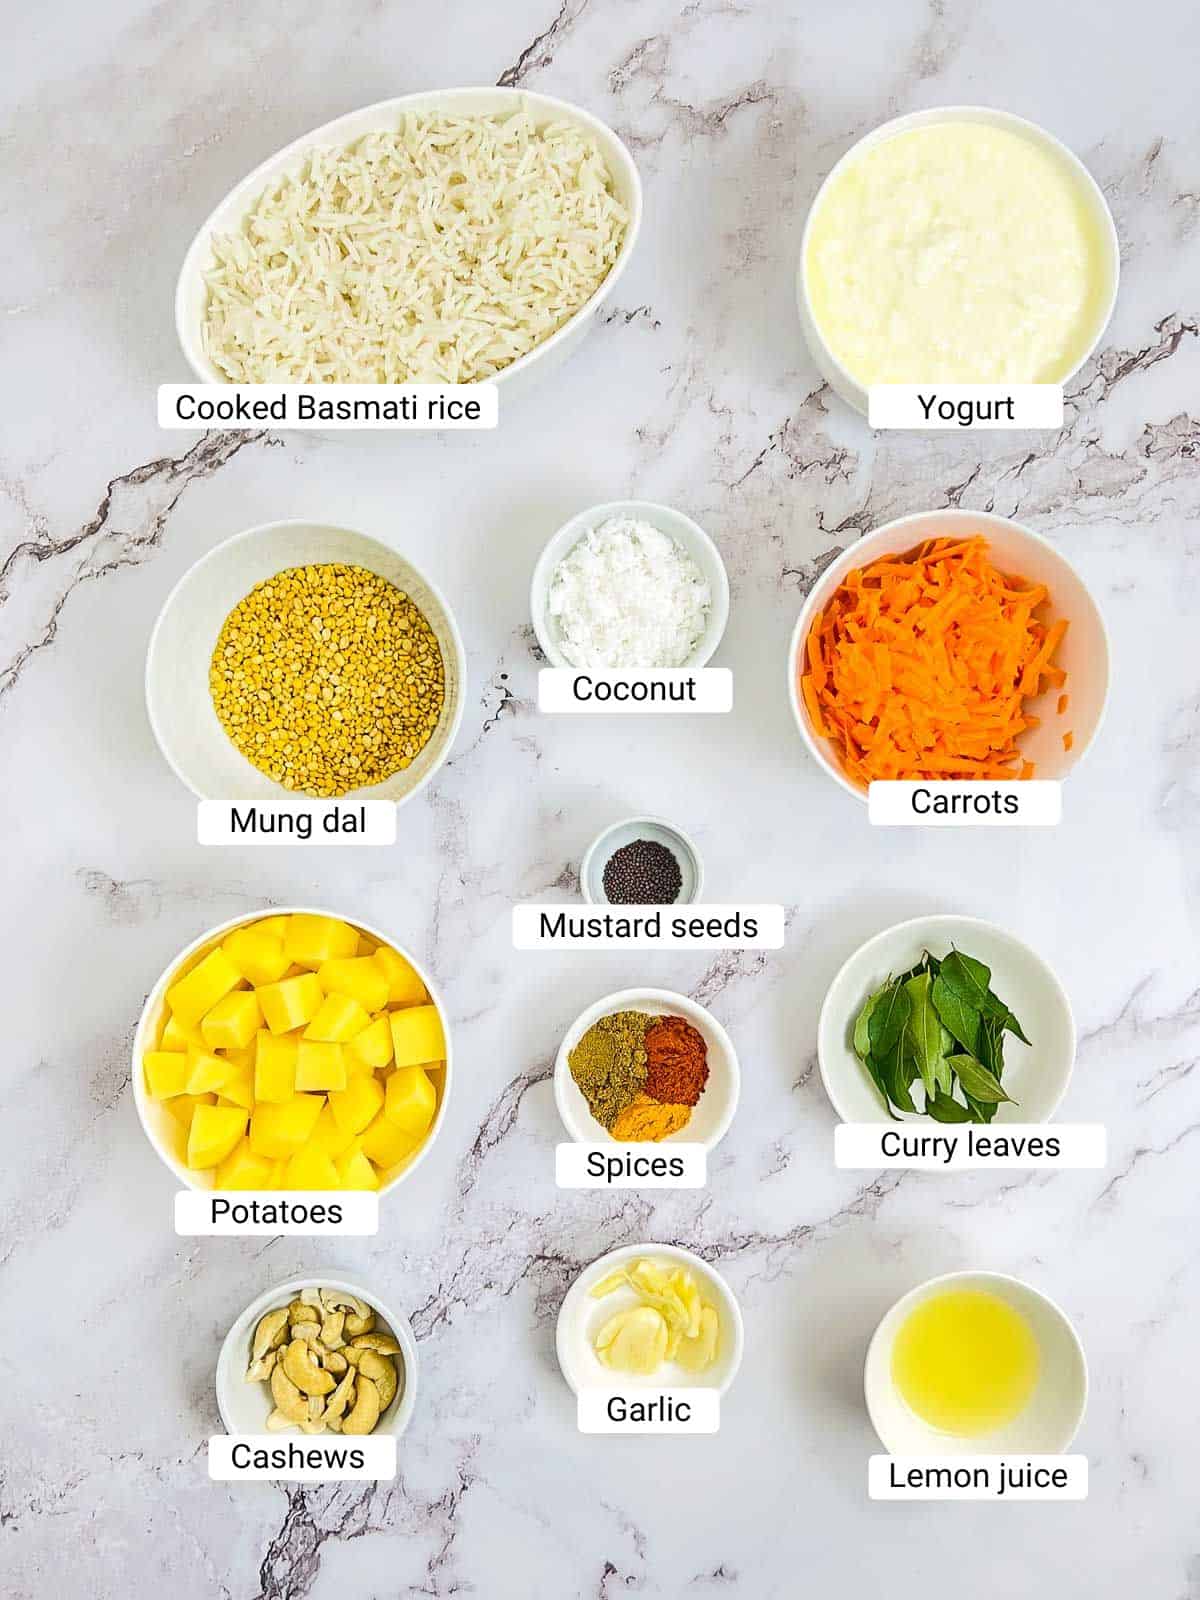 Ingredients to make curd rice bowl on a white surface.